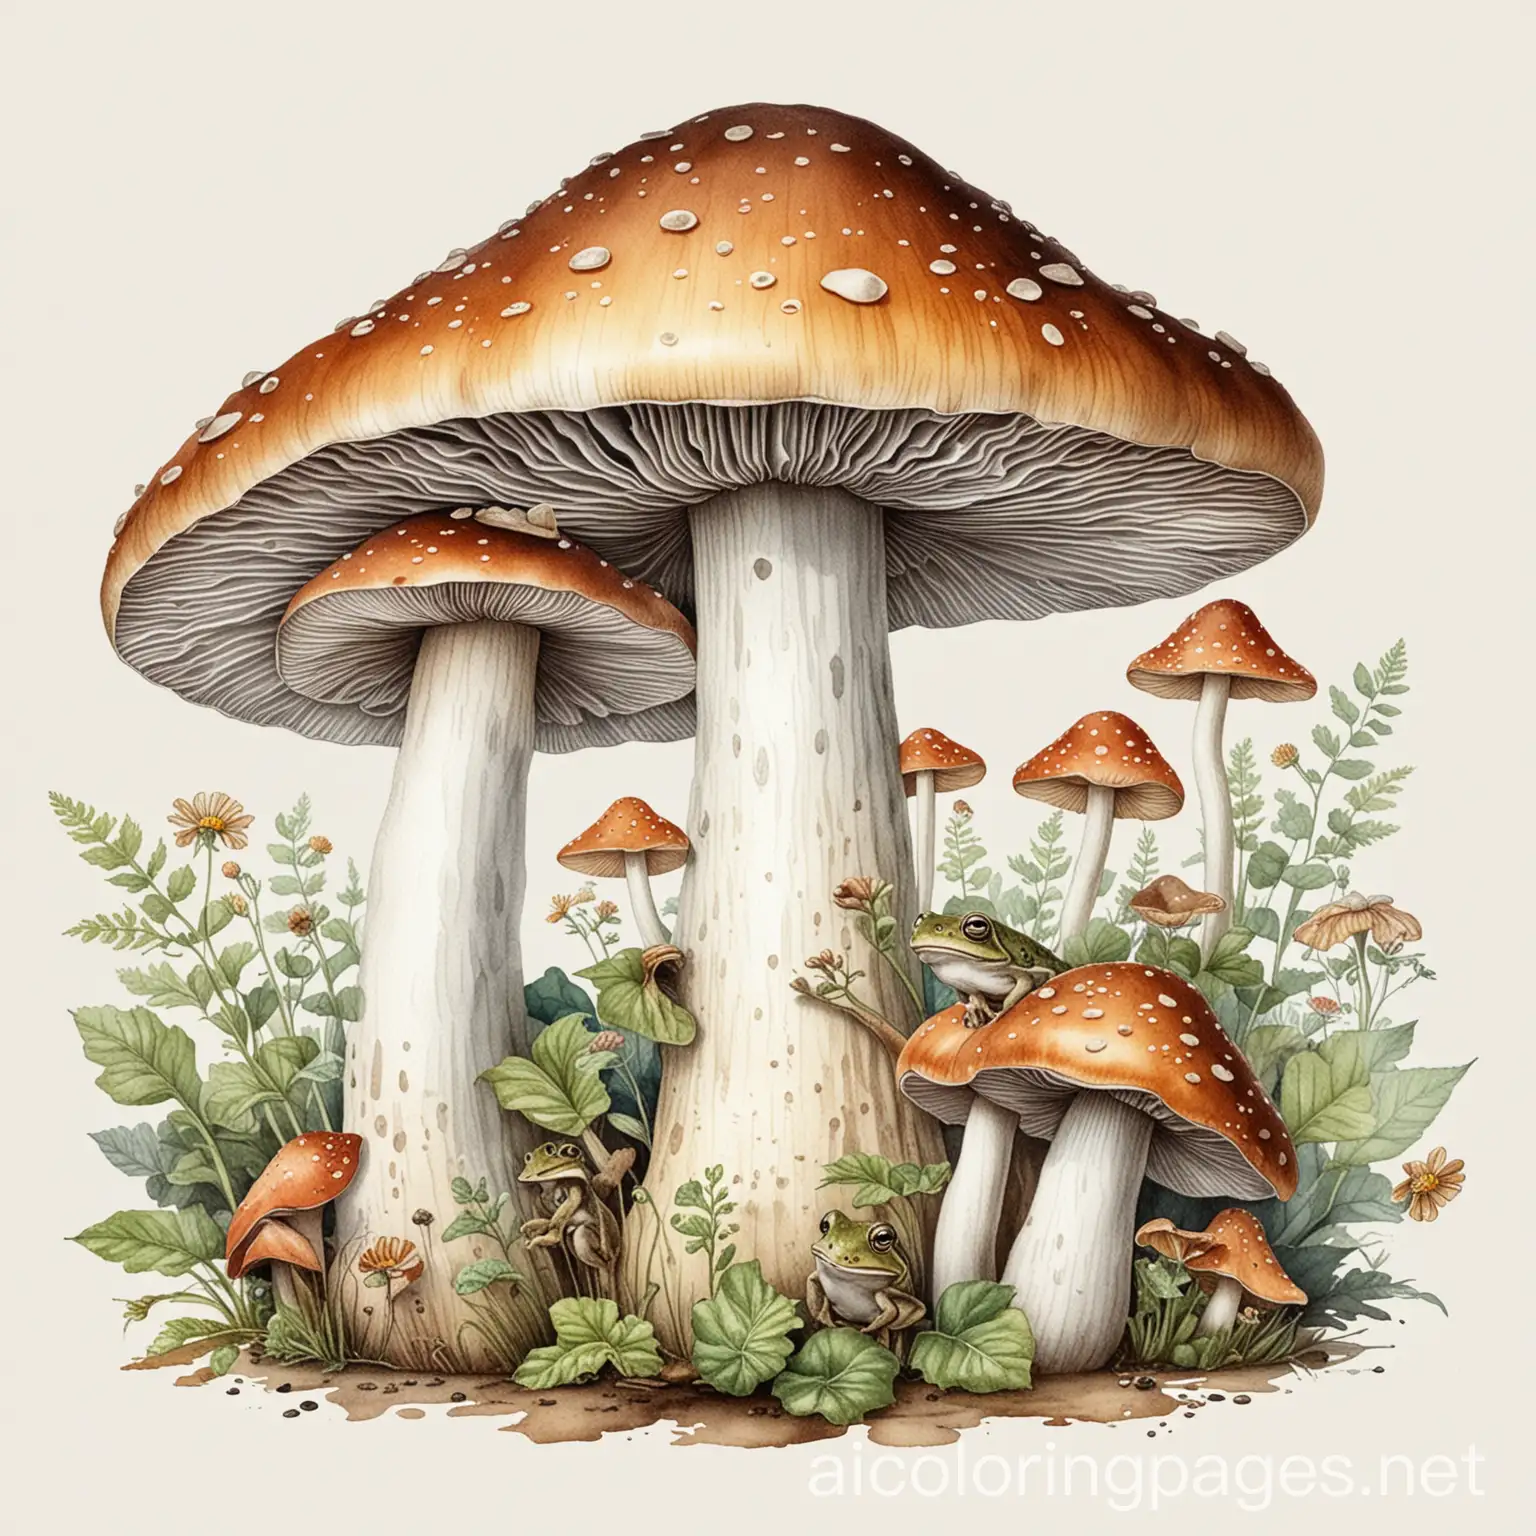 Stunning Vintage Mushrooms with two frogs under the mushroom Watercolor Illustration , Coloring Page, black and white, line art, white background, Simplicity, Ample White Space. The background of the coloring page is plain white to make it easy for young children to color within the lines. The outlines of all the subjects are easy to distinguish, making it simple for kids to color without too much difficulty